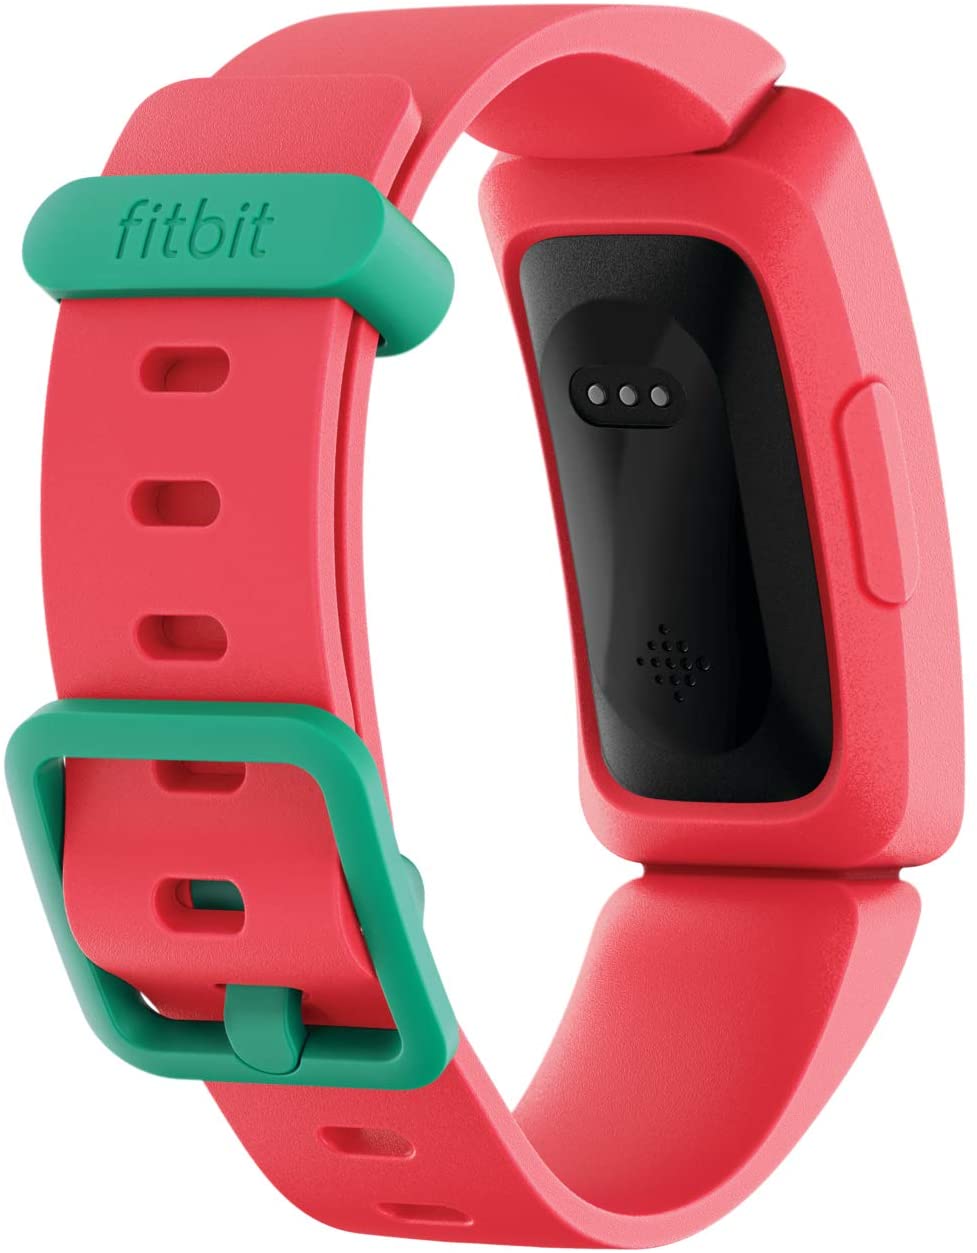 Fitbit Ace 2 Activity Tracker for Kids - Watermelon & Teal [Electronic ...